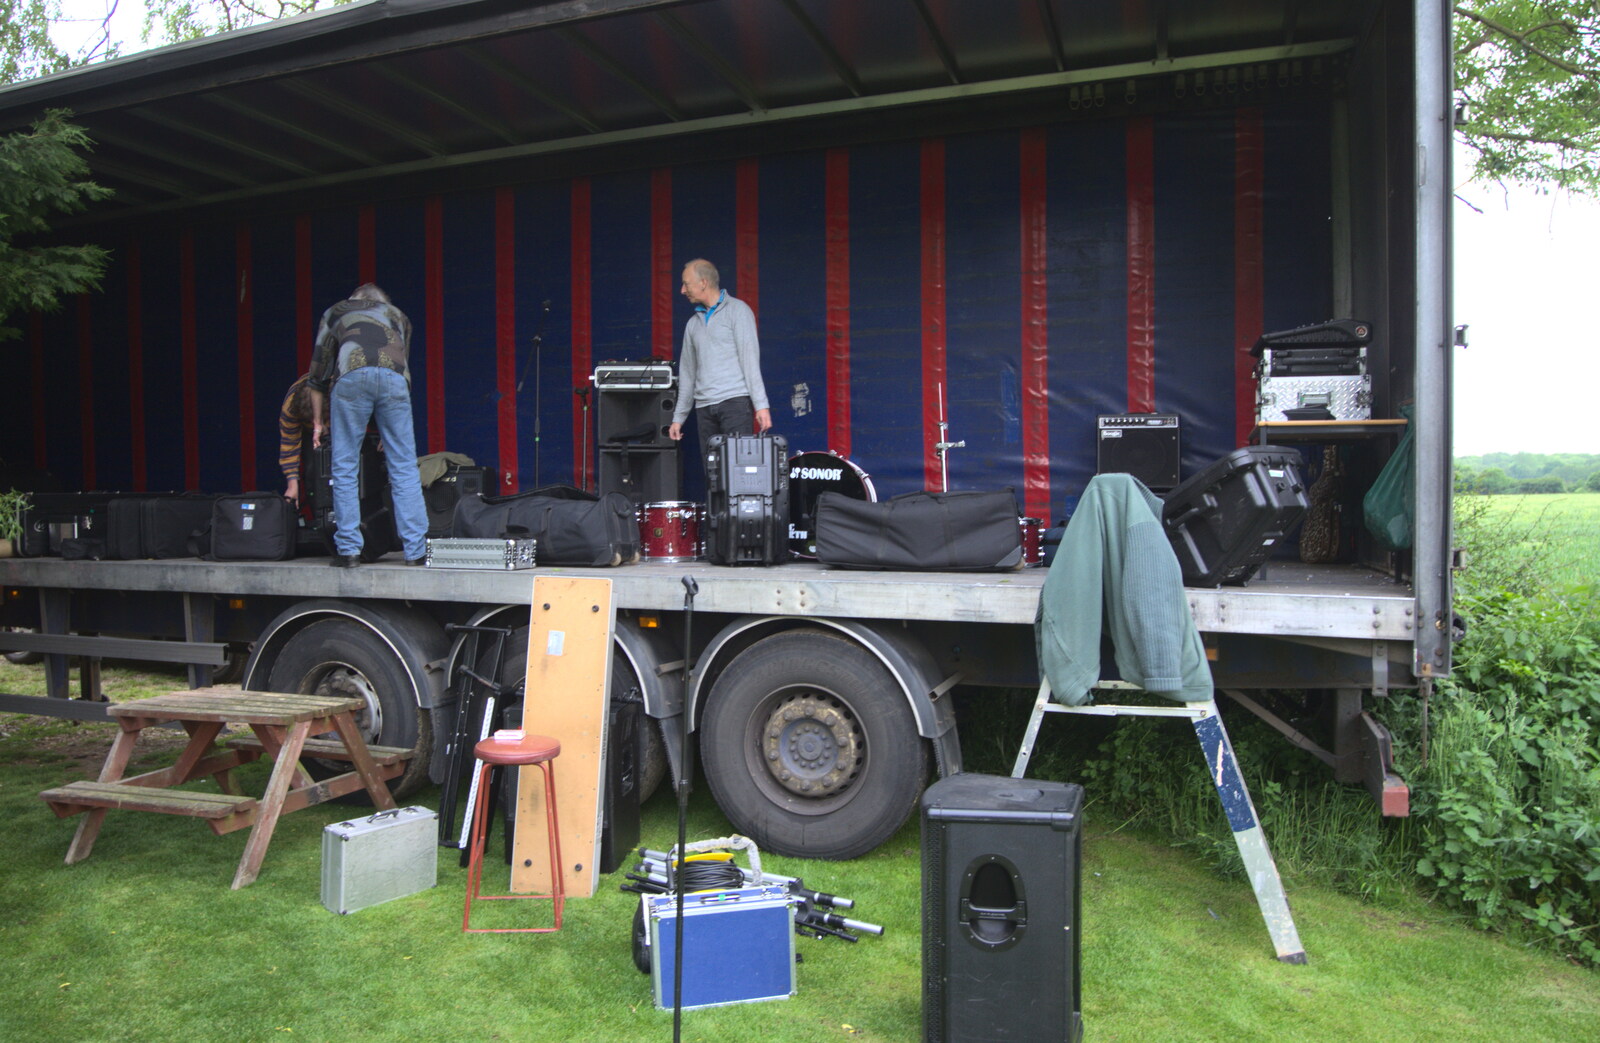 The BBs at the White Hart, Roydon, Norfolk - 1st June 2012: A stage on the back of a Tautliner trailer